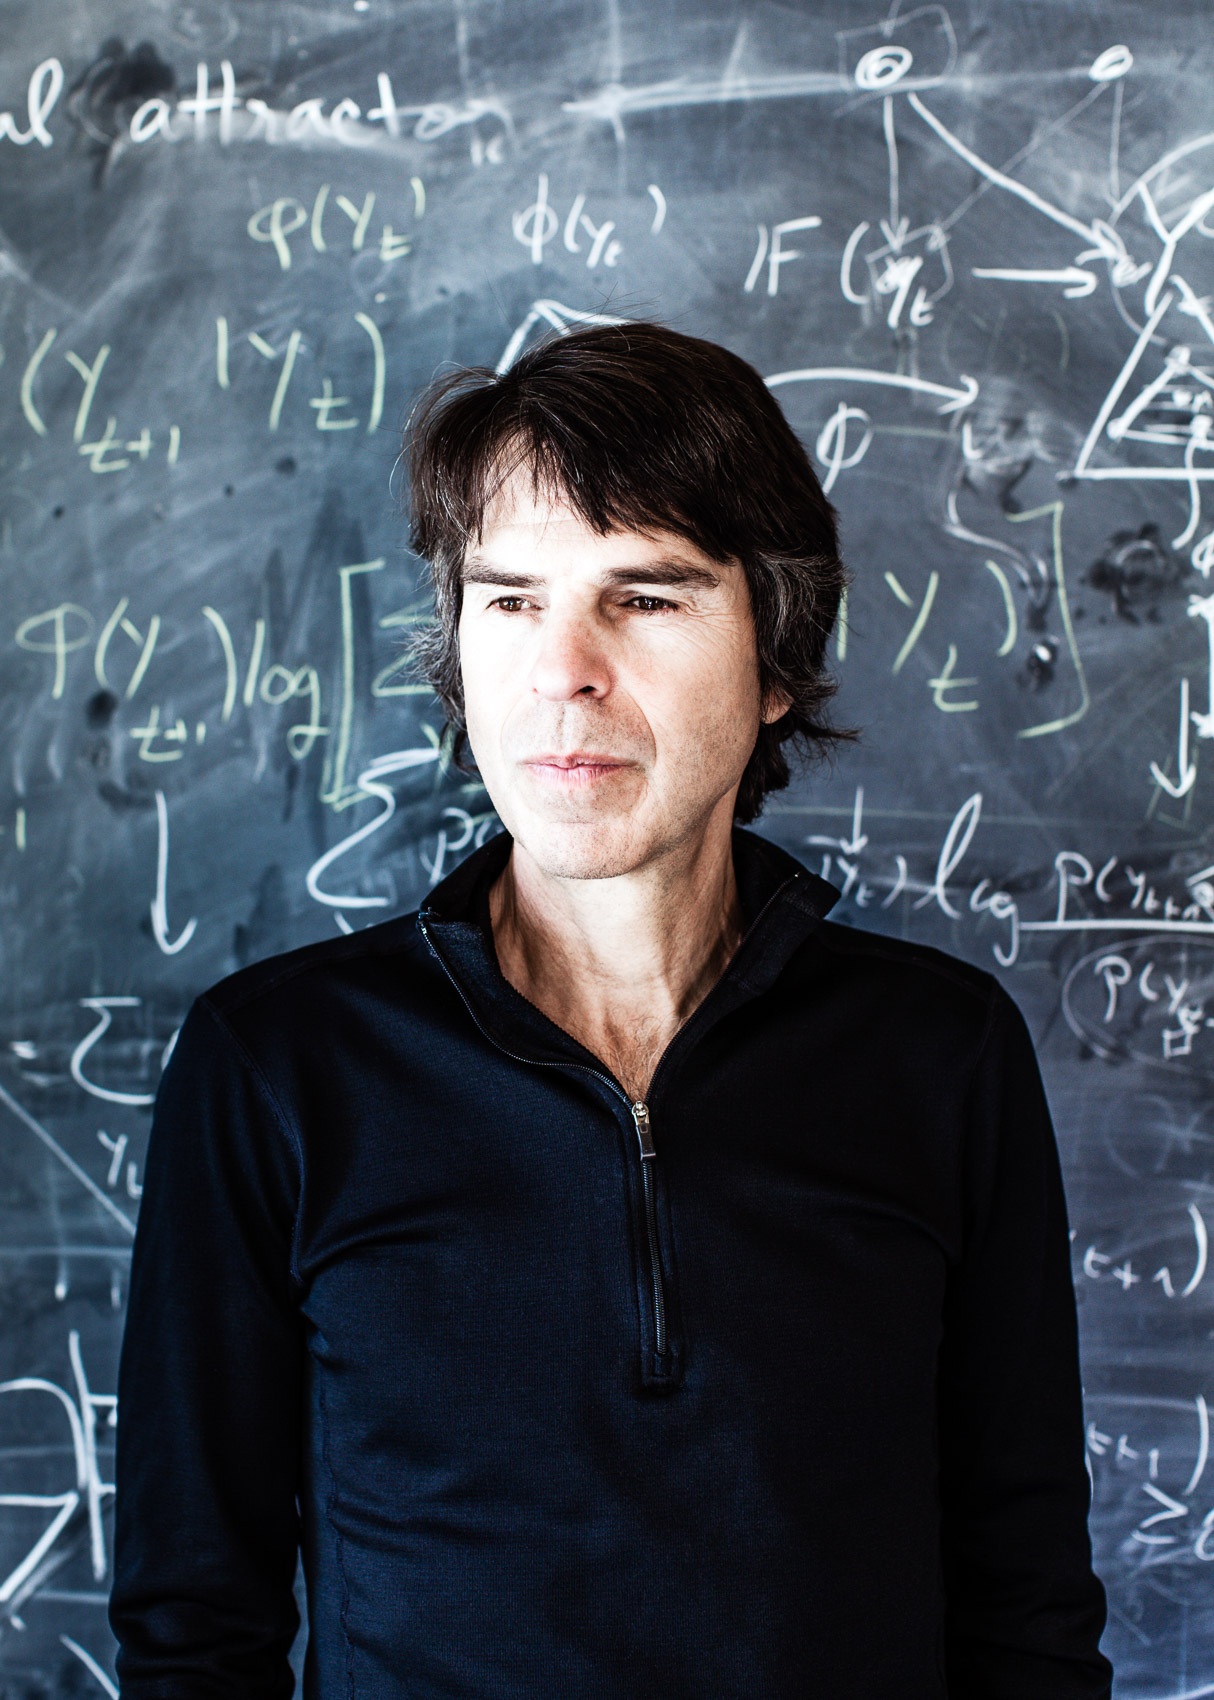 David Wolpert, mathematician, physicist, computer scientist & professor at Santa Fe Institute | Los Angeles | Editorial and Commercial Photographer Patrick Strattner